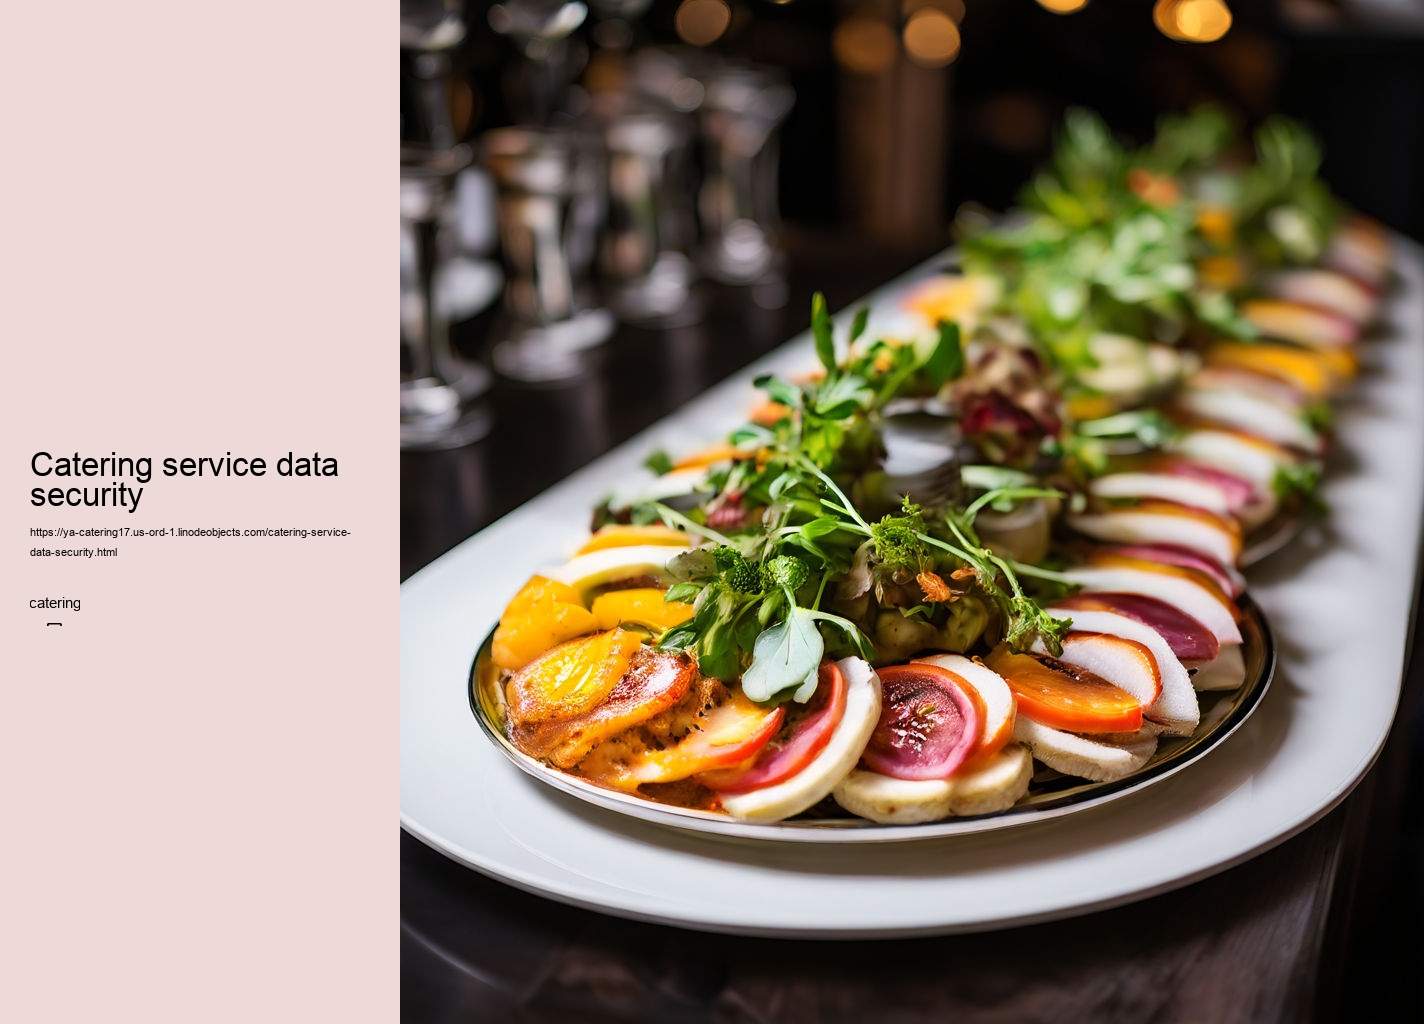 Catering service data security